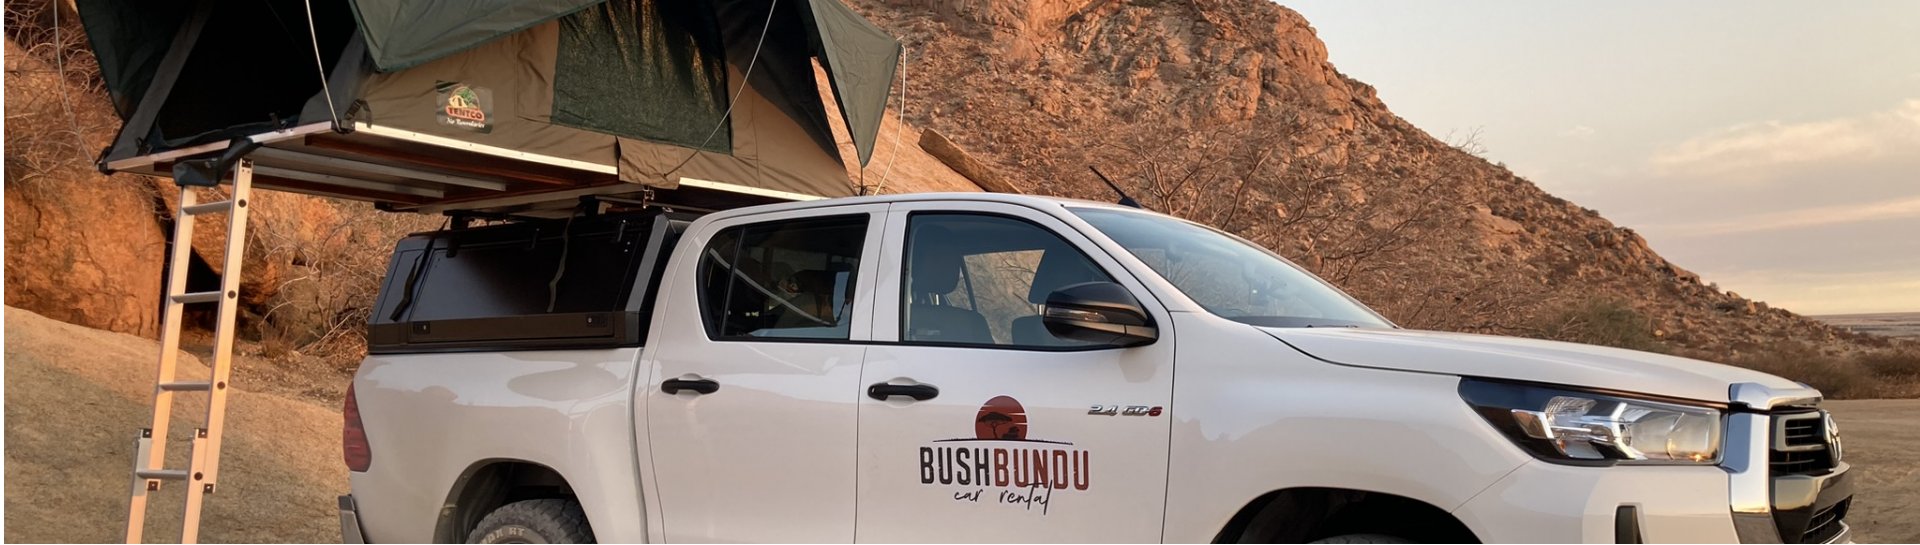 bushbundu-car-rental-windhoek-namibia-side-image-of-toyota-hilux-with-pitched-tent-on-the-roof-camping-page-cover-image